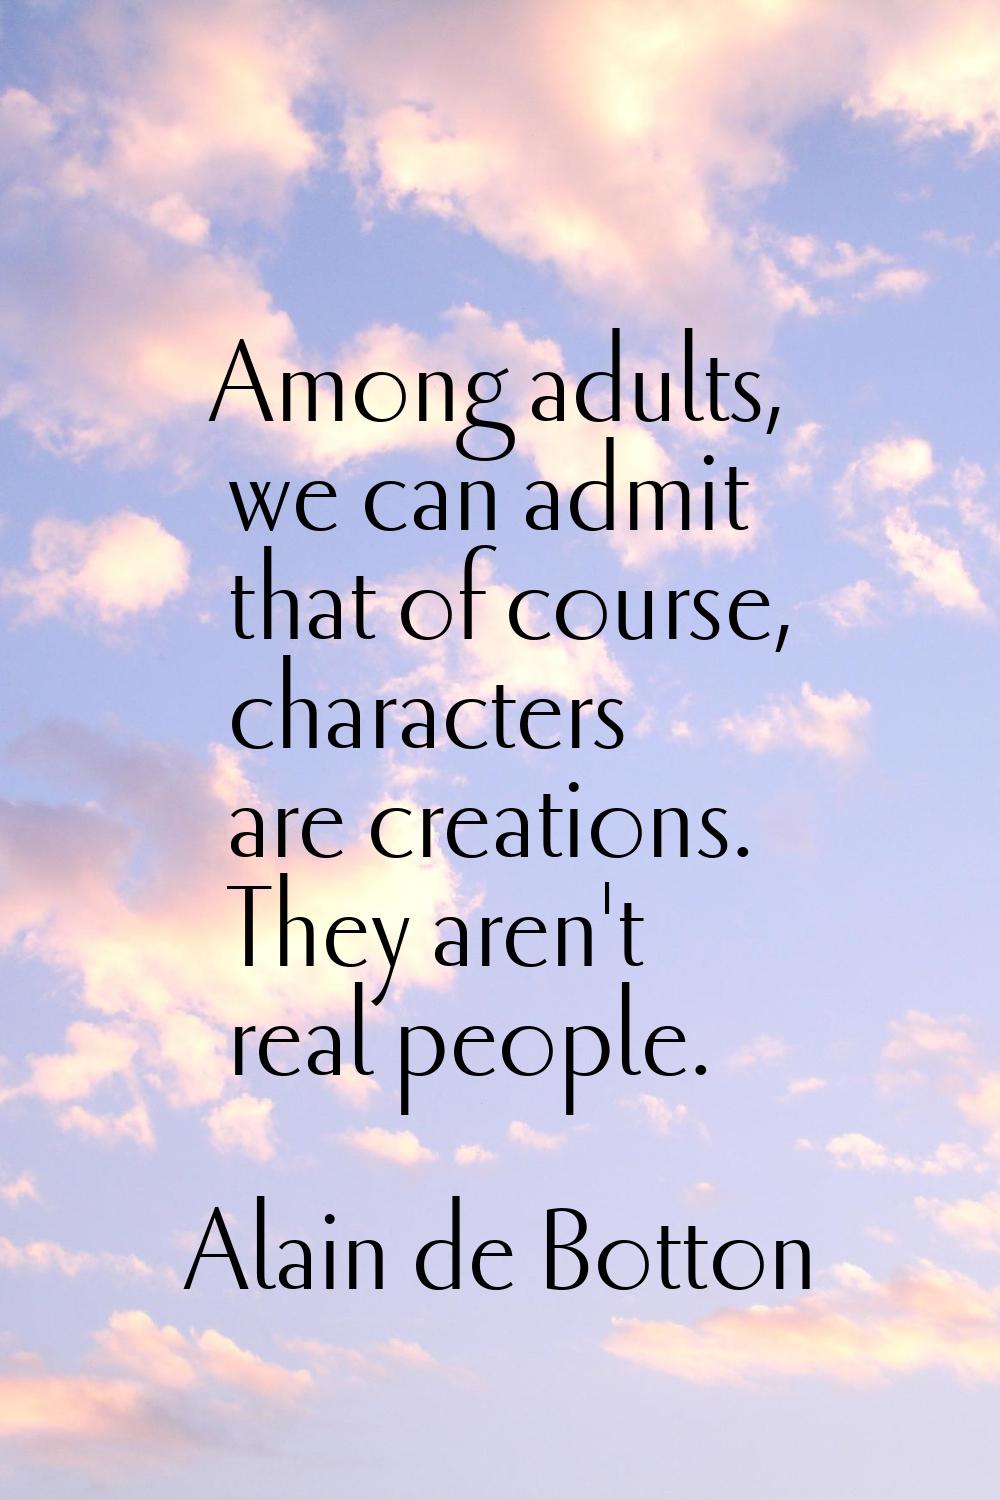 Among adults, we can admit that of course, characters are creations. They aren't real people.